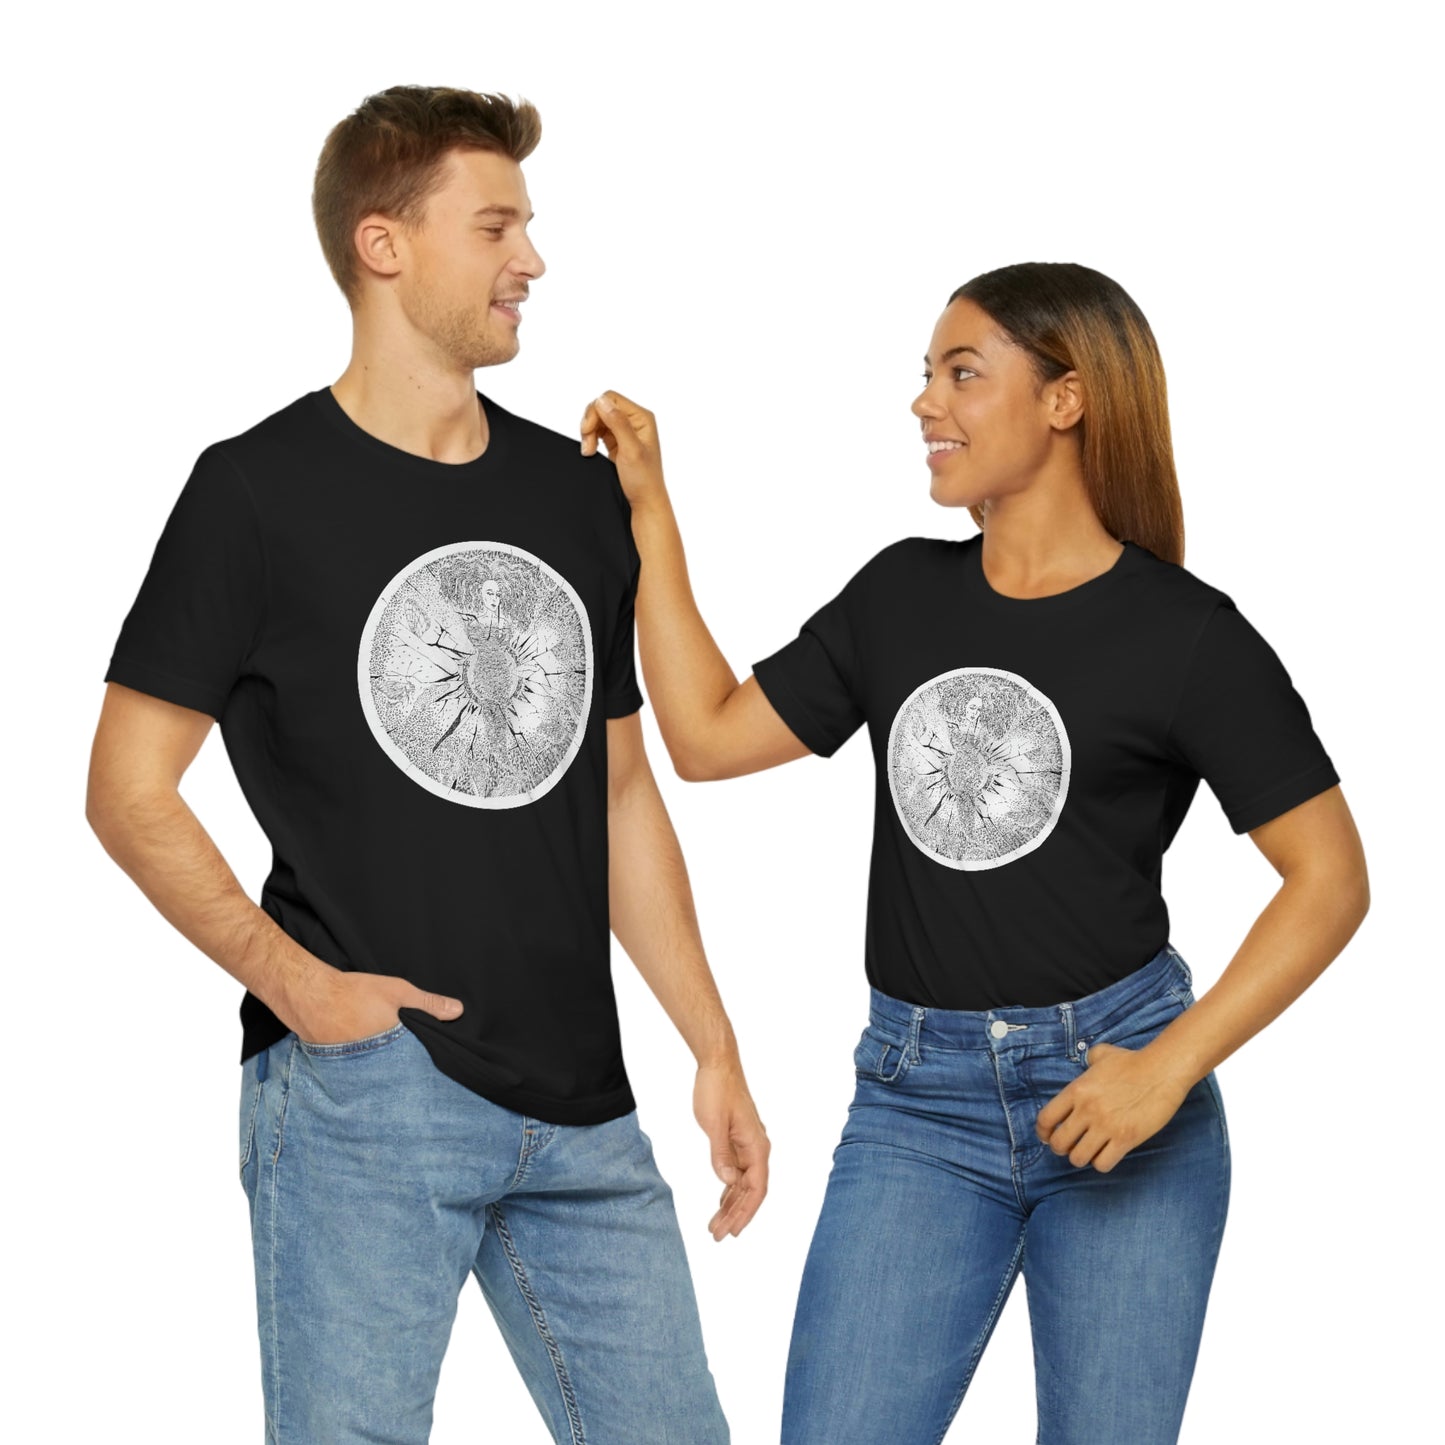 Chinese Zodiac Sign T Shirt (Snake) Unisex Regular Fit Limited Edition